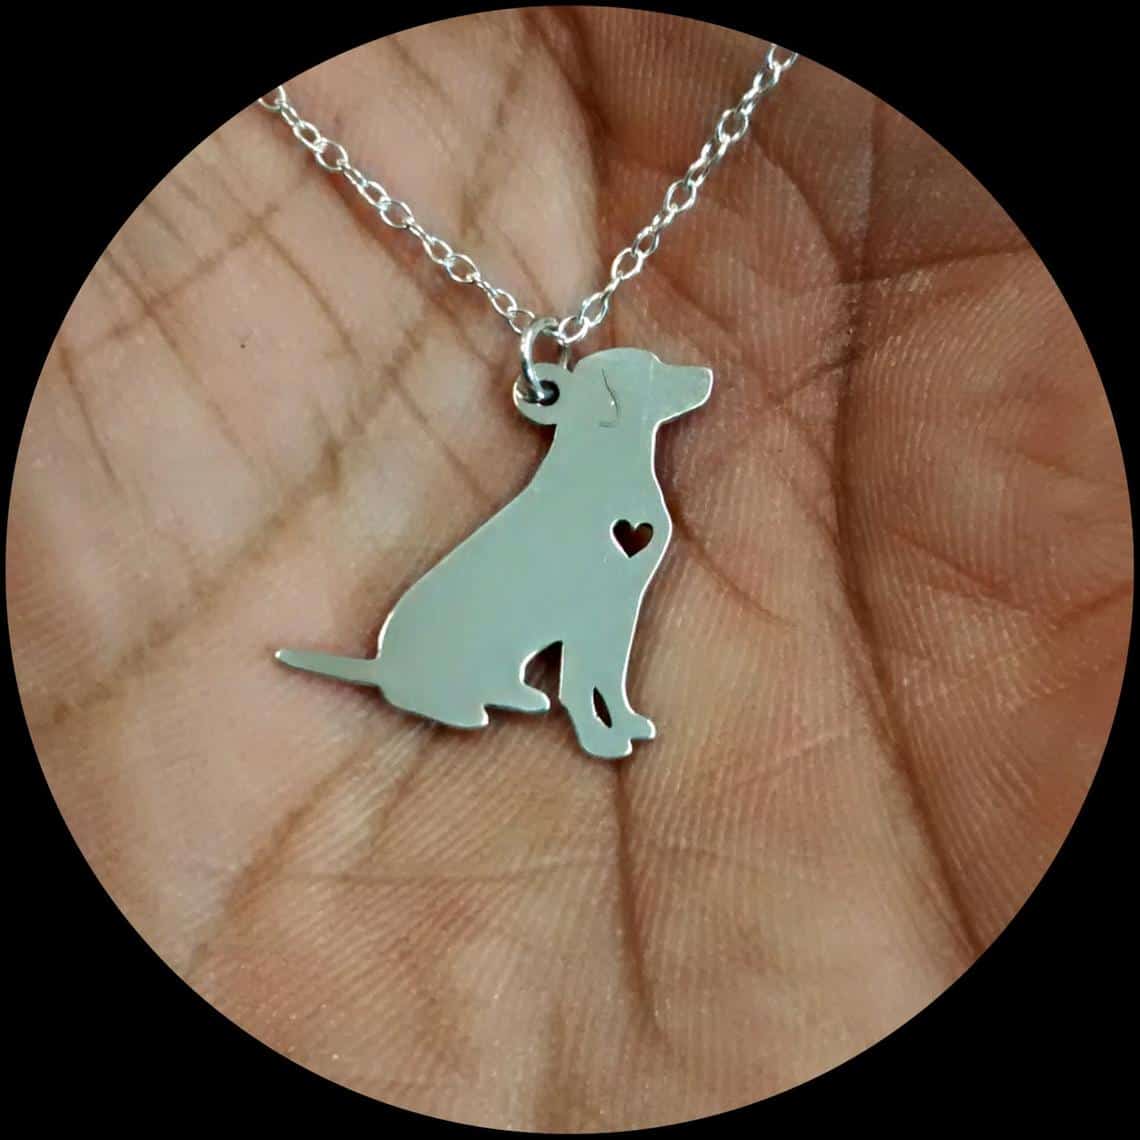 Unique gifts for dog lovers available on Etsy. Labrador Retriever pendant.